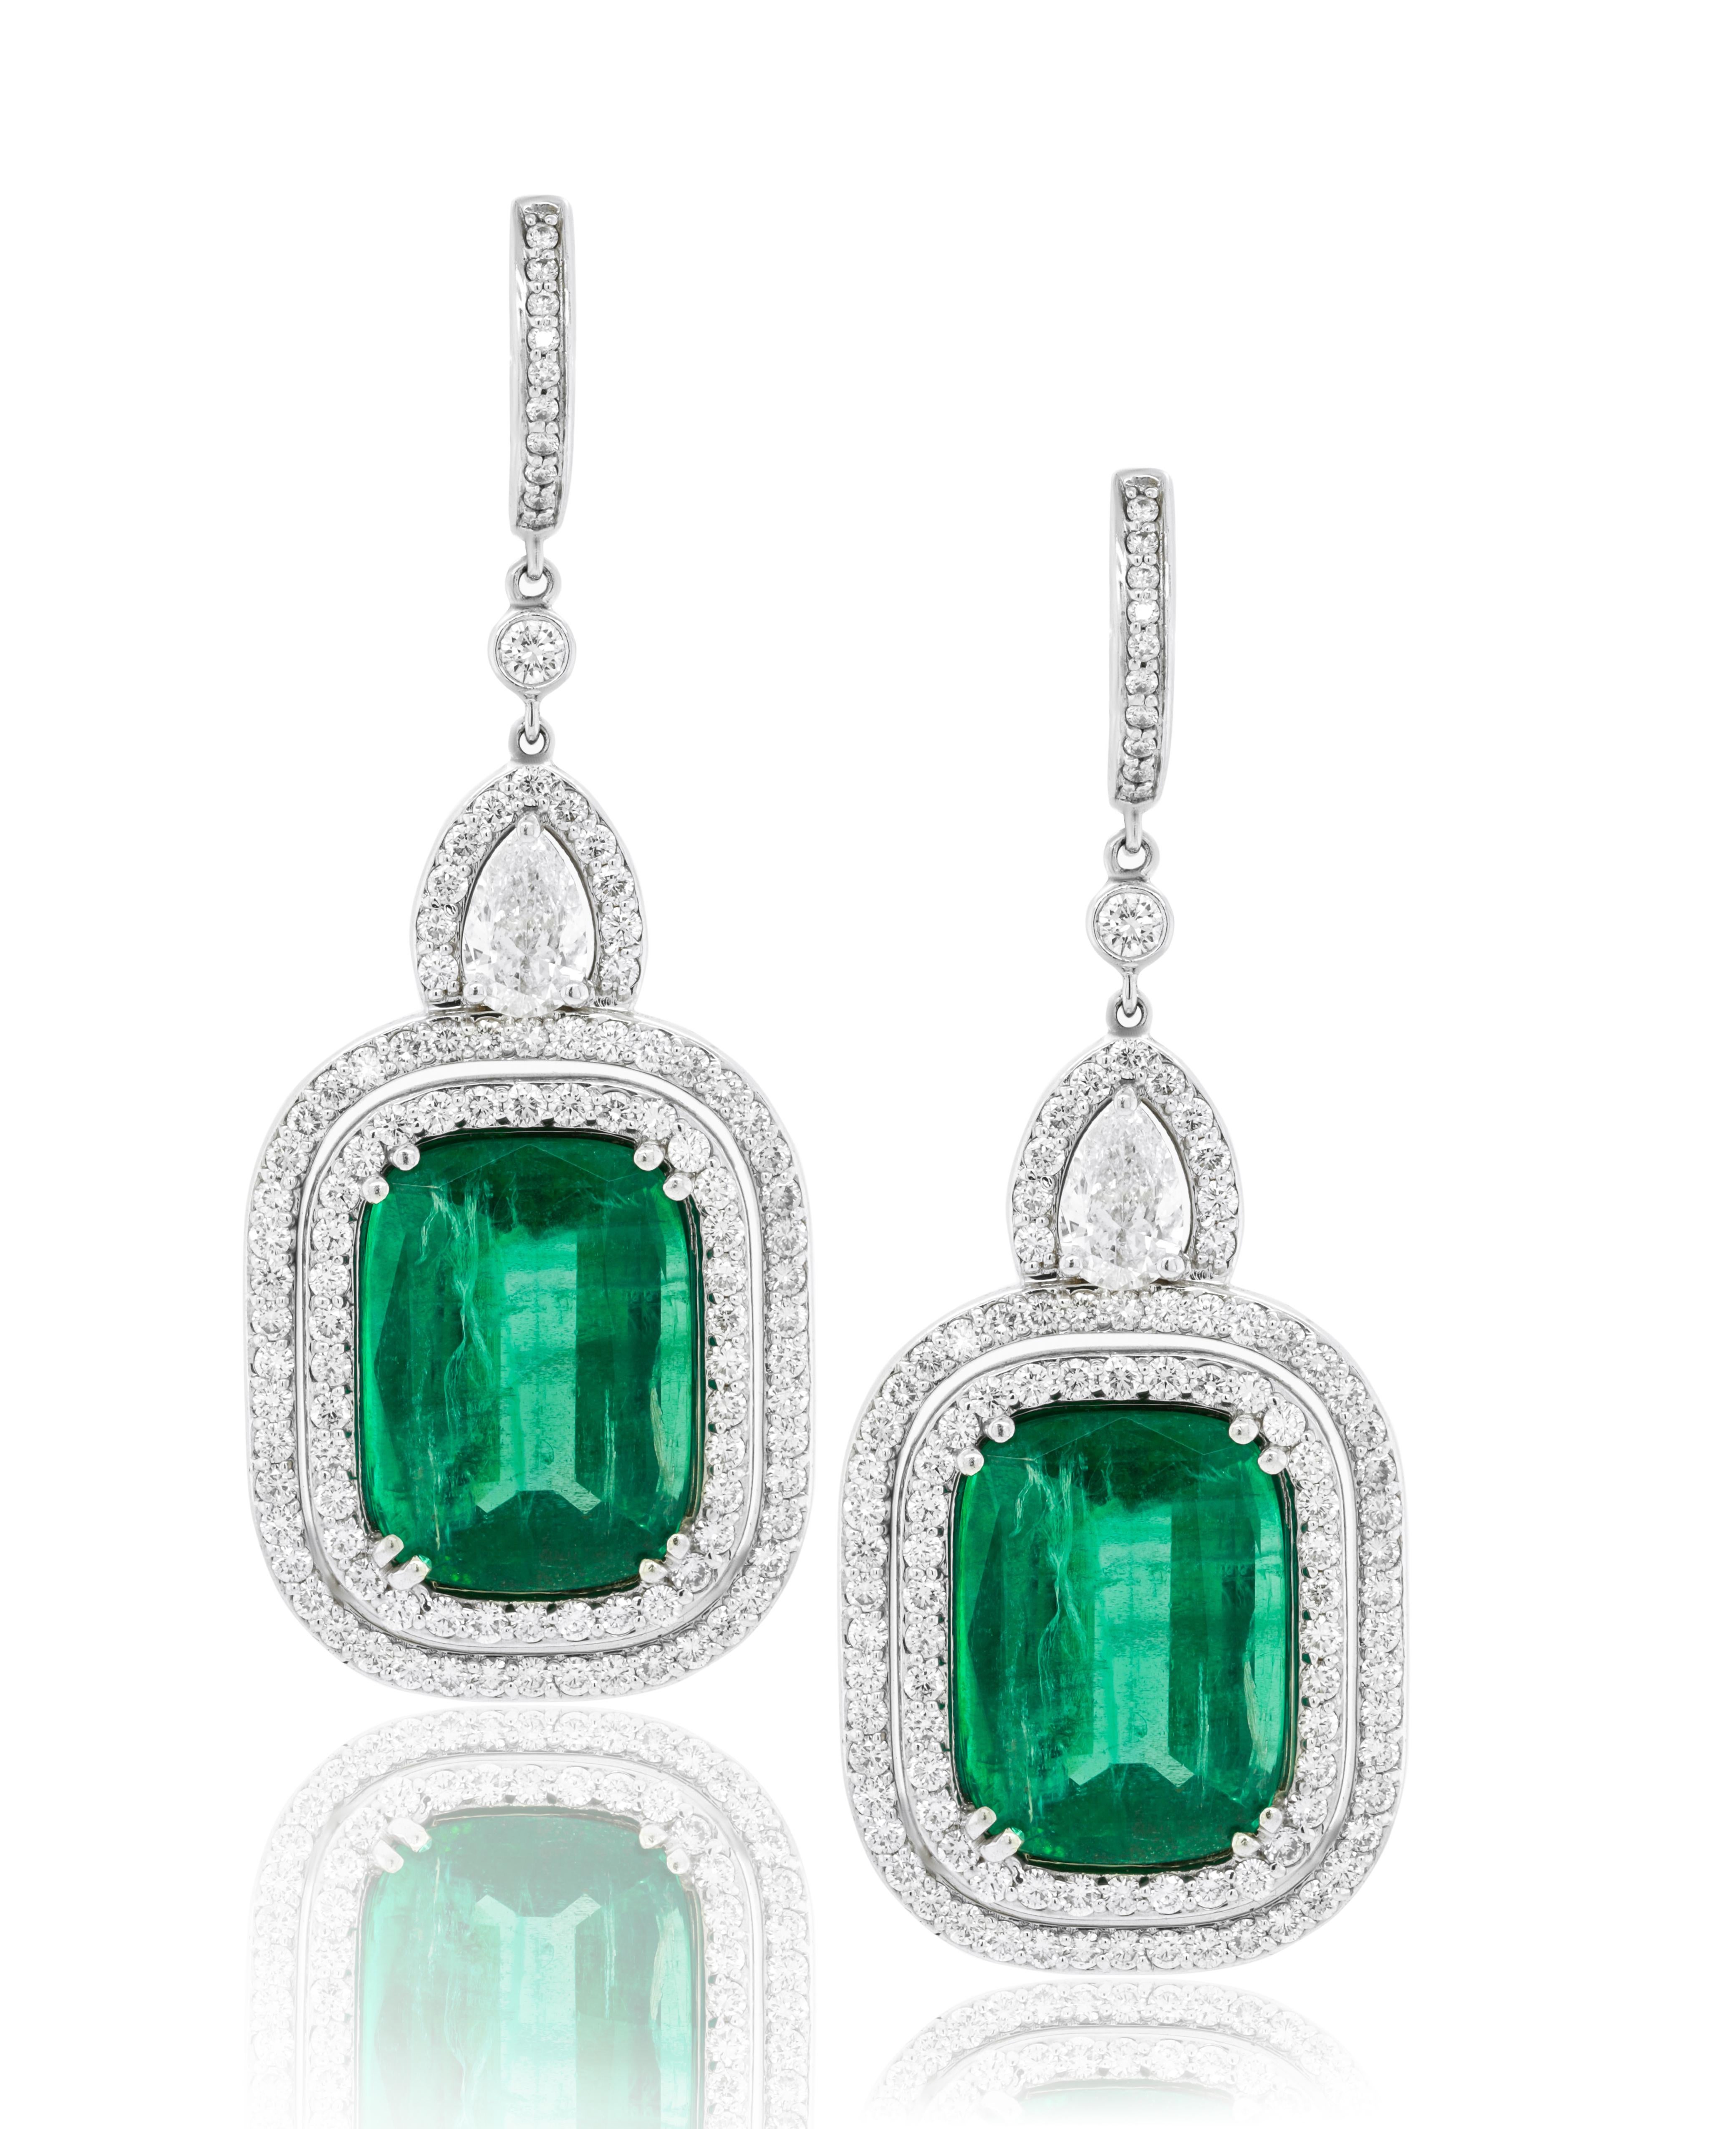 Emerald Cut Diana M. 18kt White Gold Earrings with Emerald and Diamonds For Sale